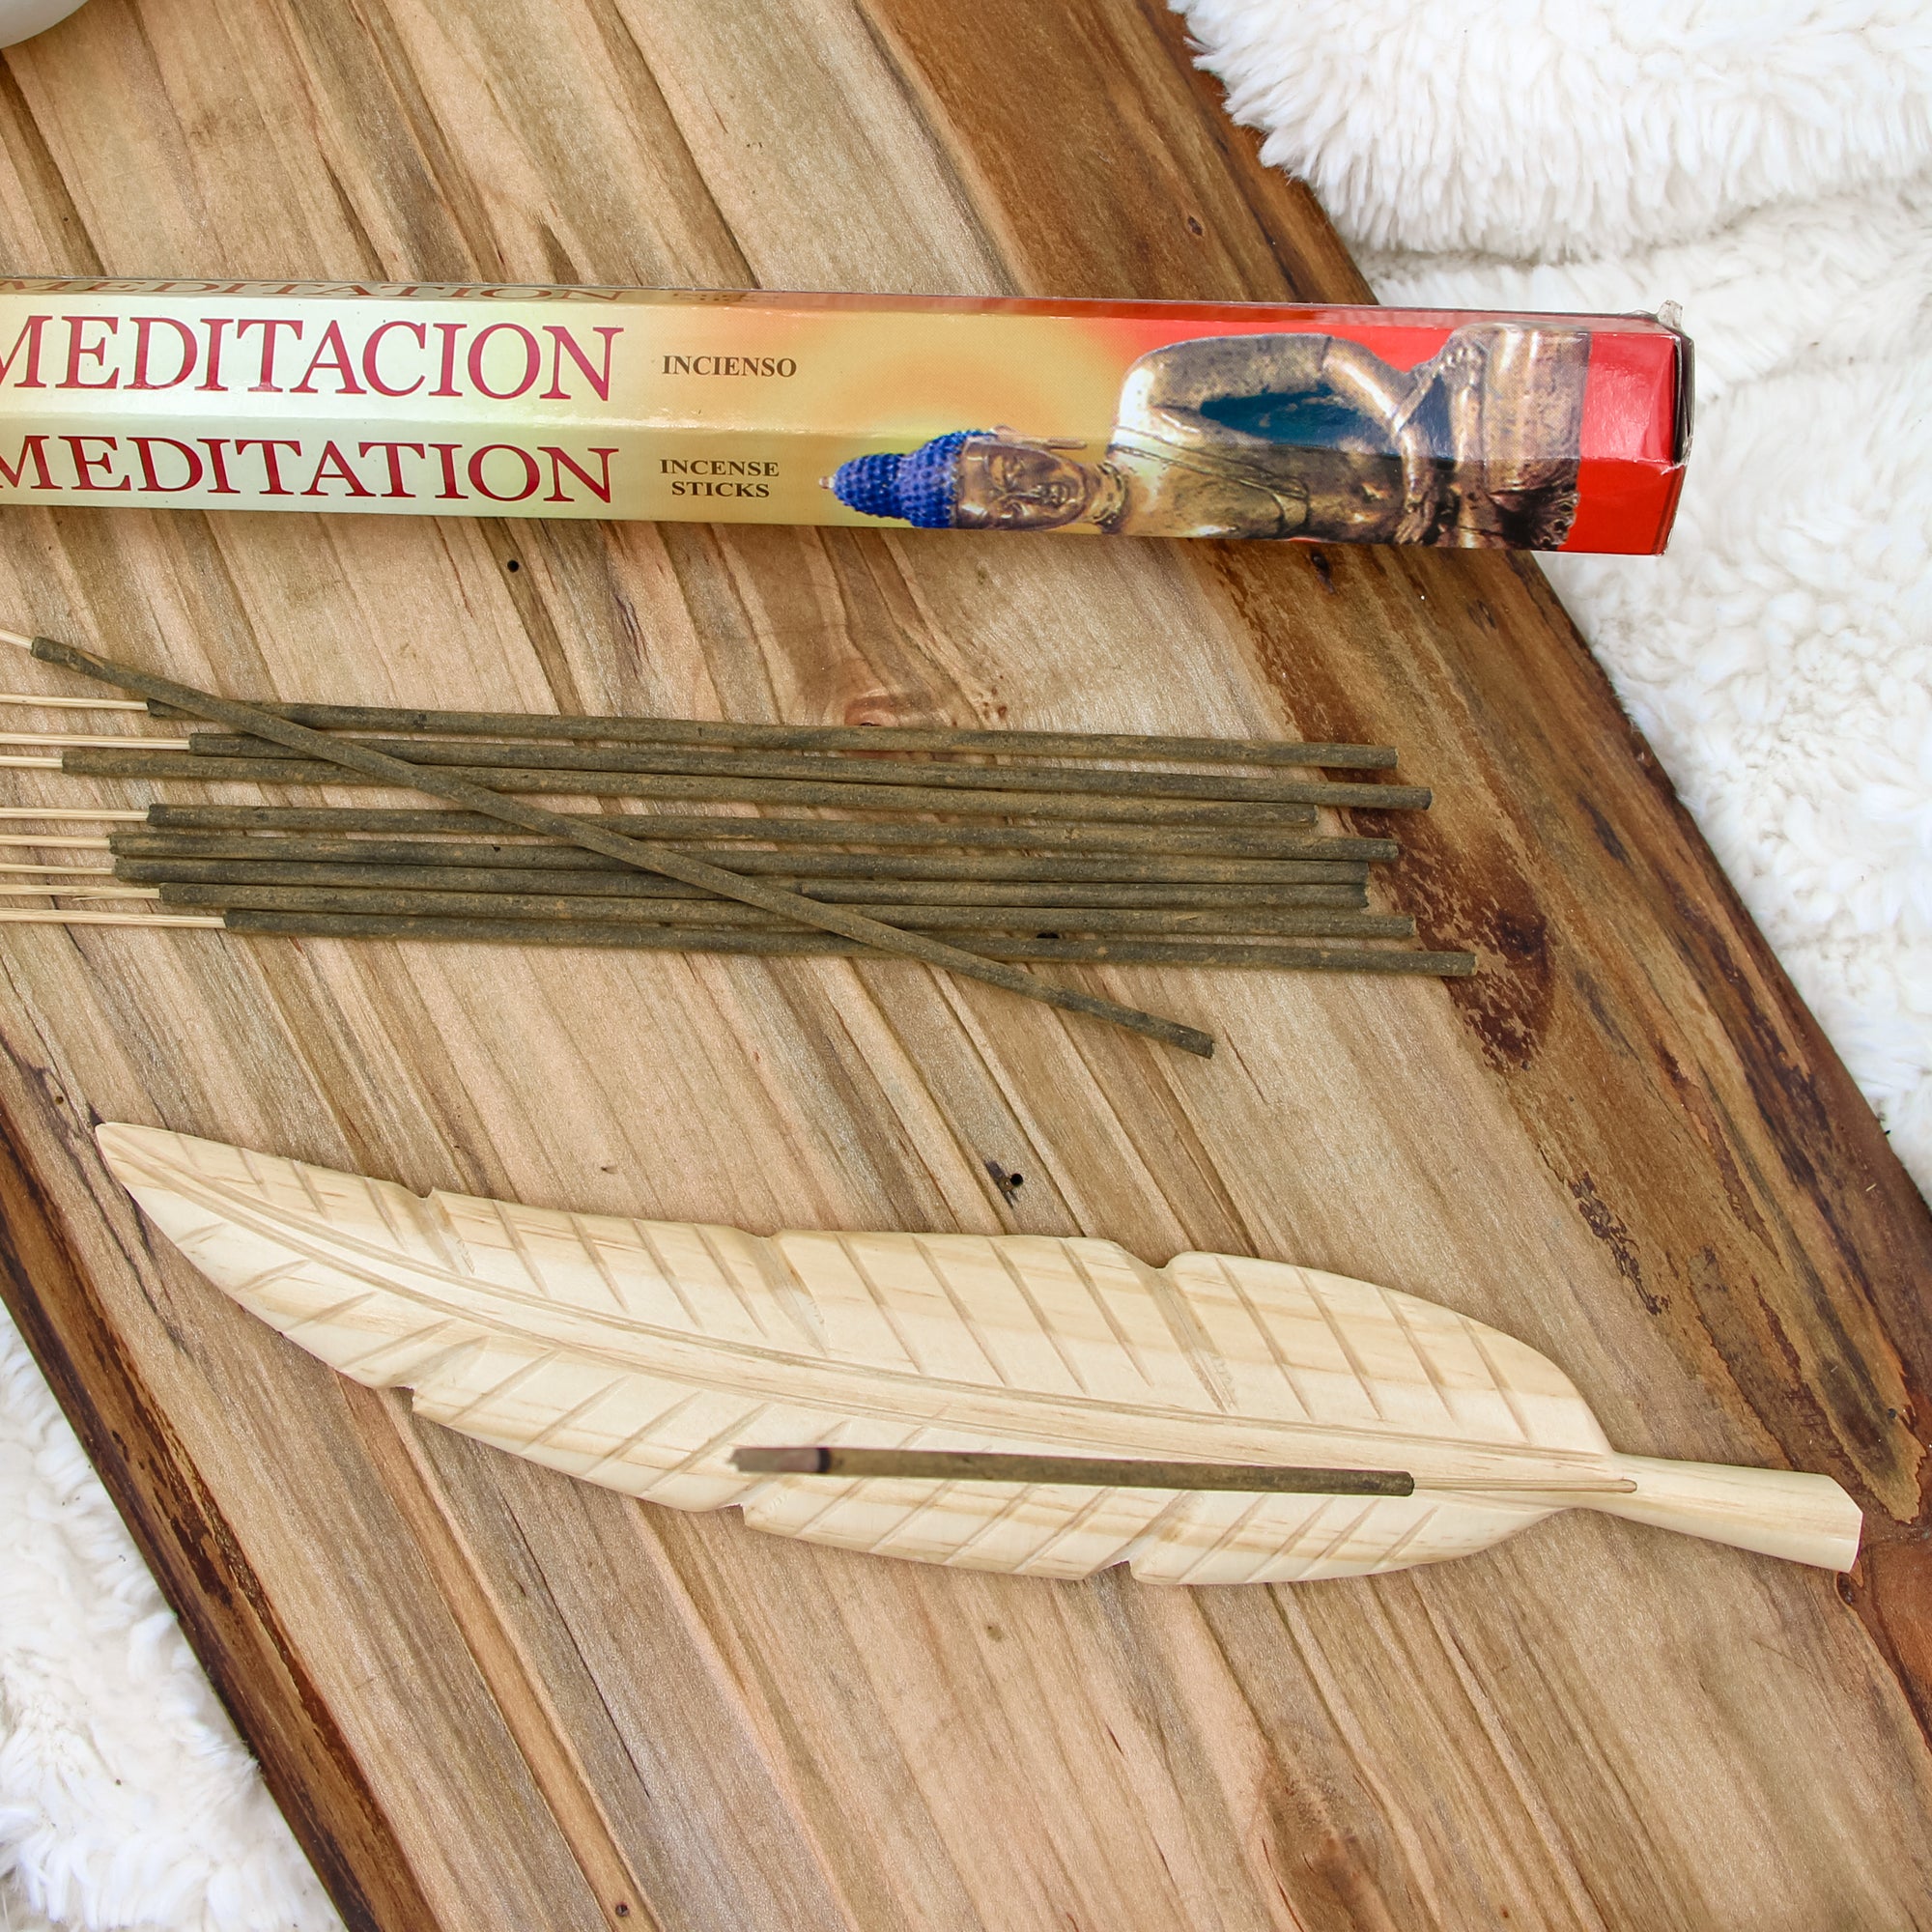 wood incense holder, flower of life incense, wood incense plate, ash catcher, feather incense holder, feather shaped incense, 